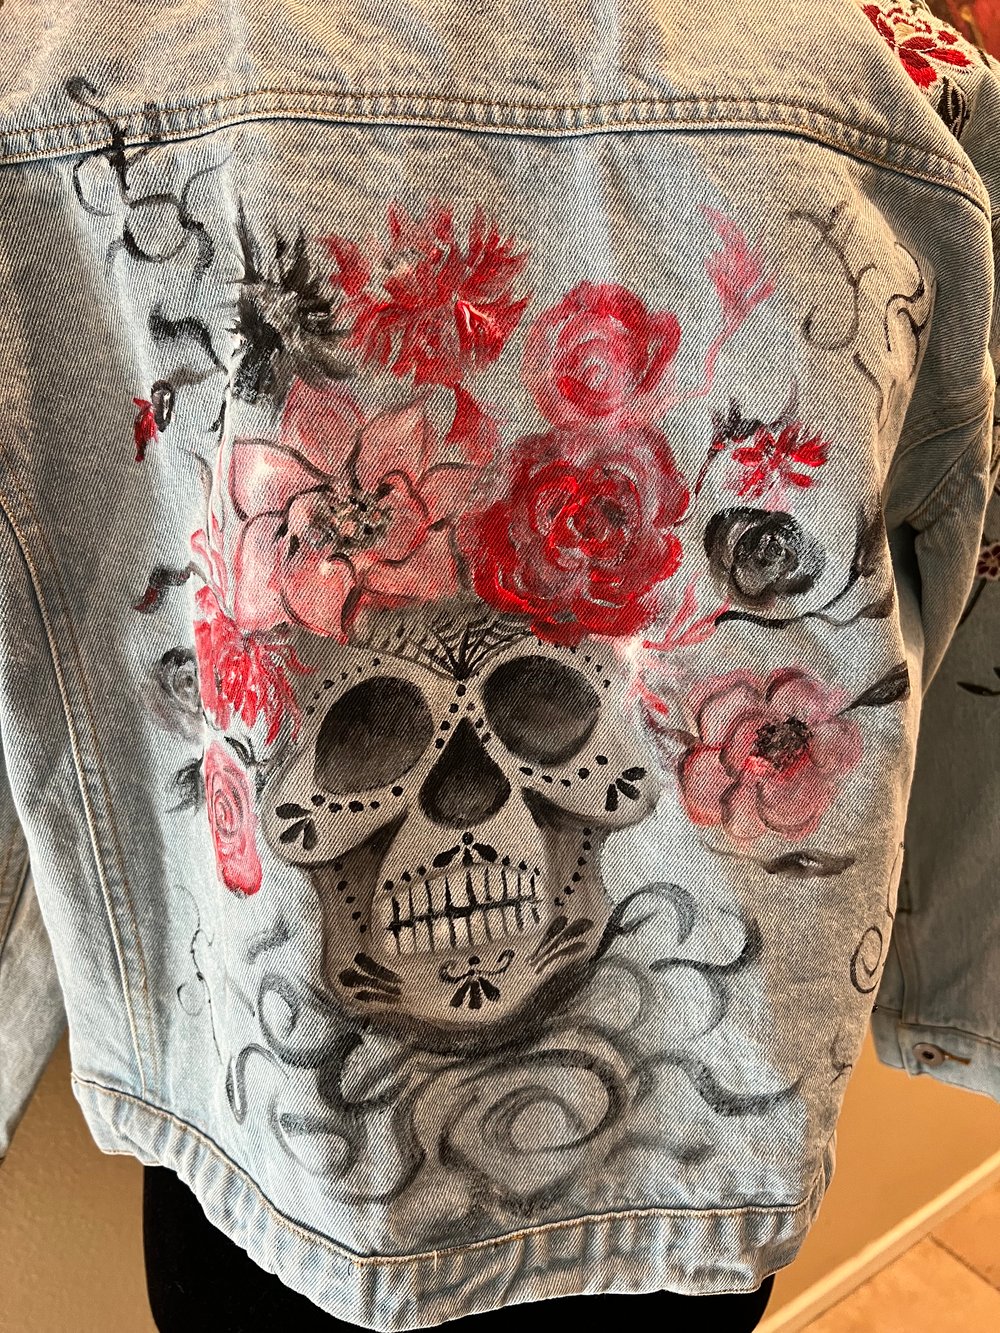 Vintage Blue Jean Jacket Hand Painted Day of the Dead - Medium